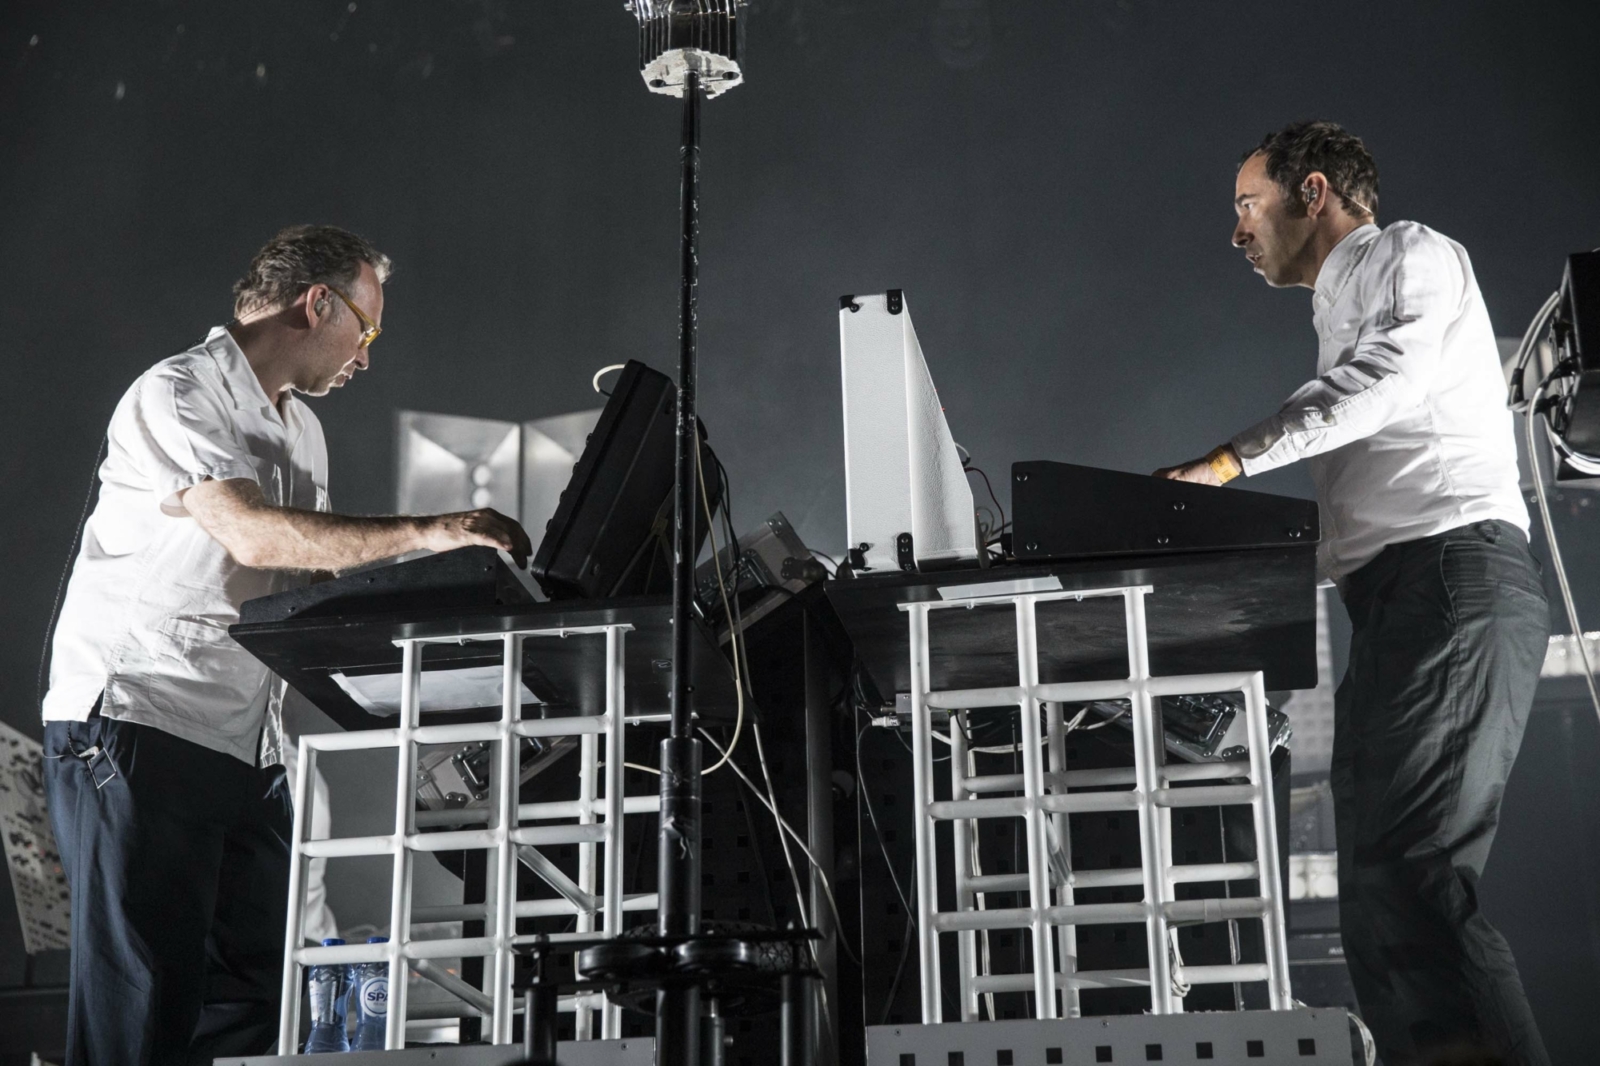 Soulwax have announced new UK dates